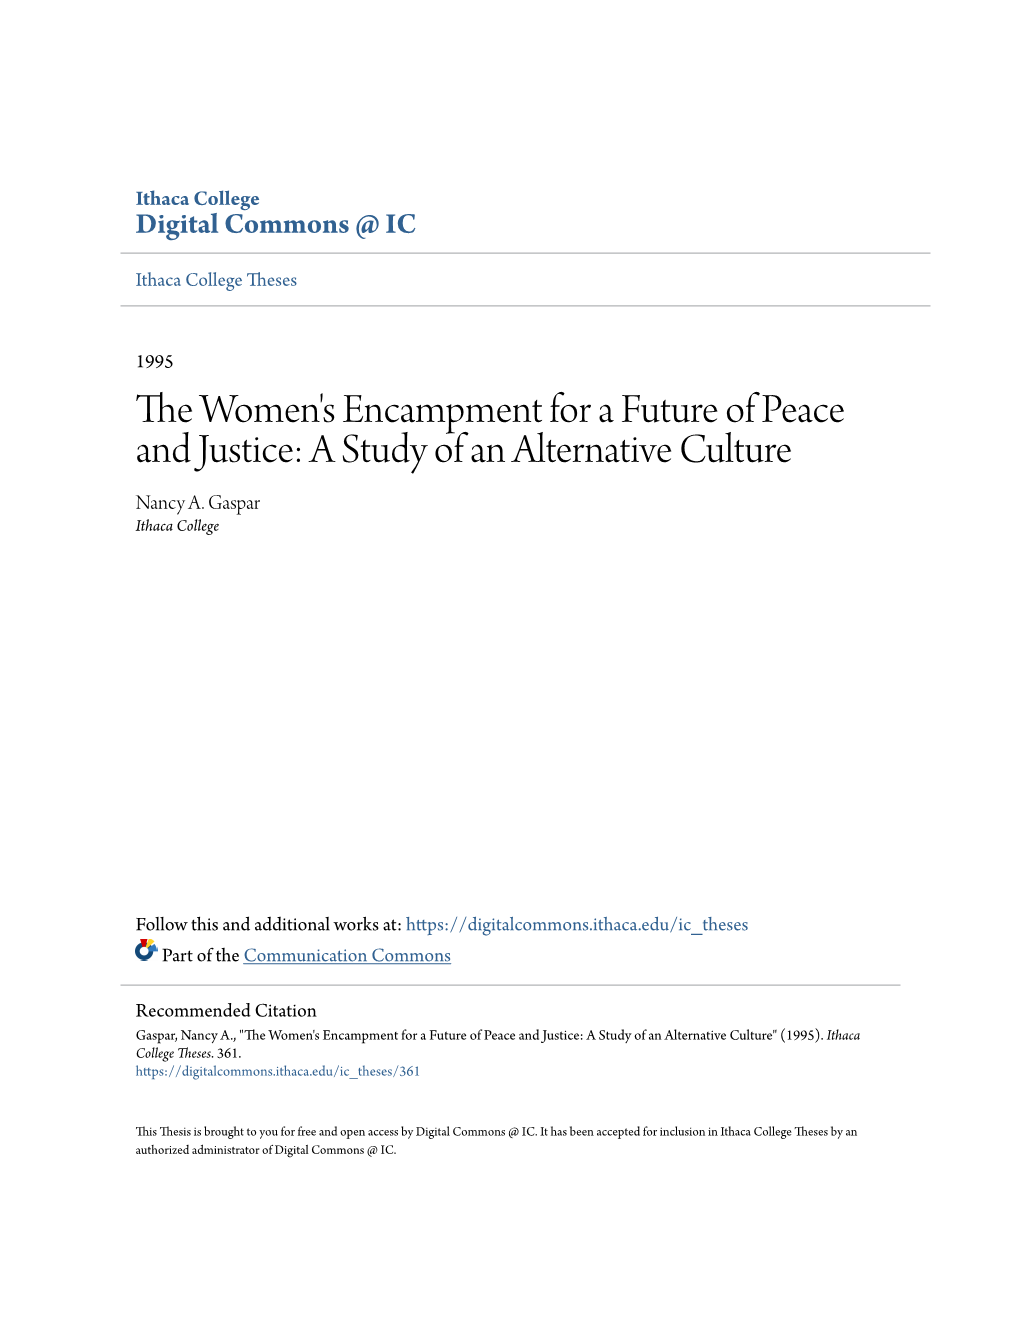 The Women's Encampment for a Future of Peace and Justice: A